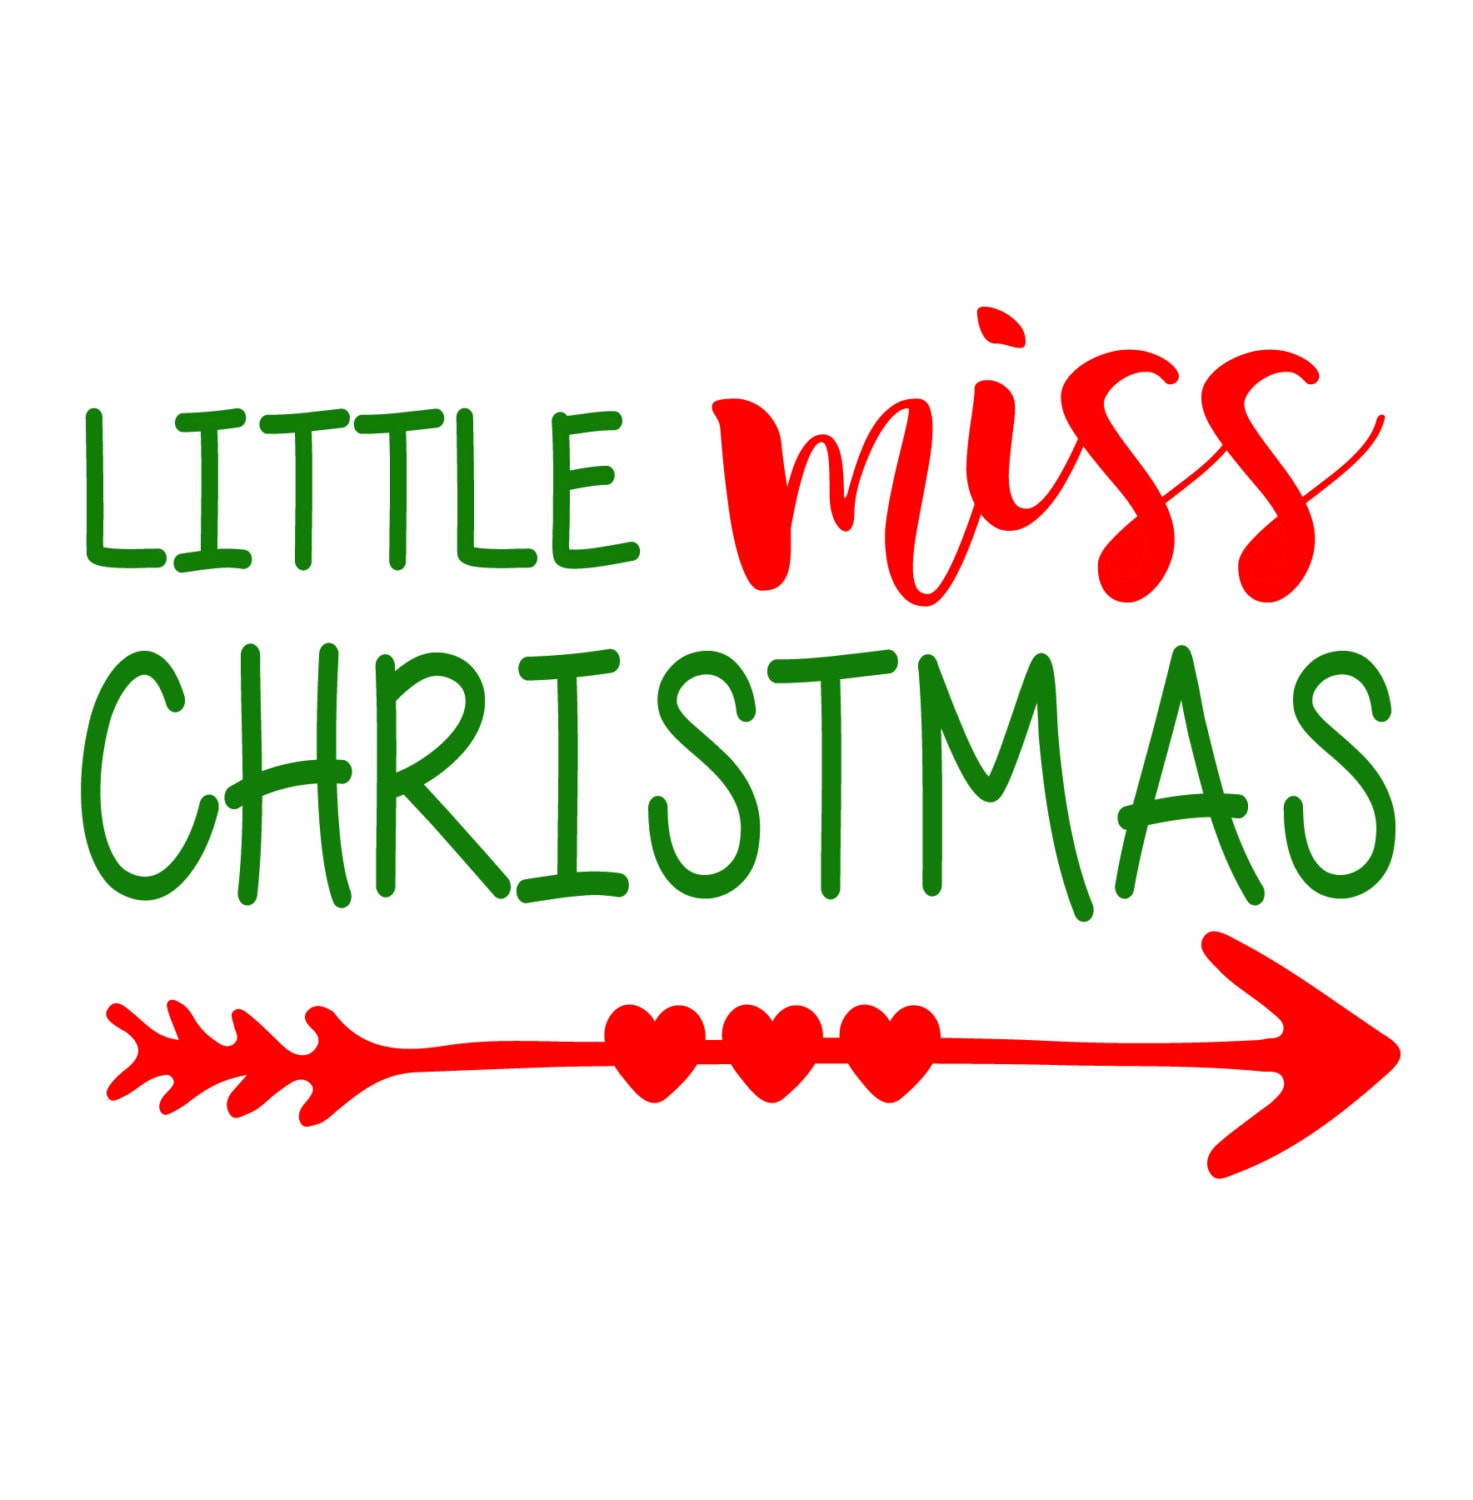 Download Little Miss Christmas SVG File by CaseCustomCreations on Etsy